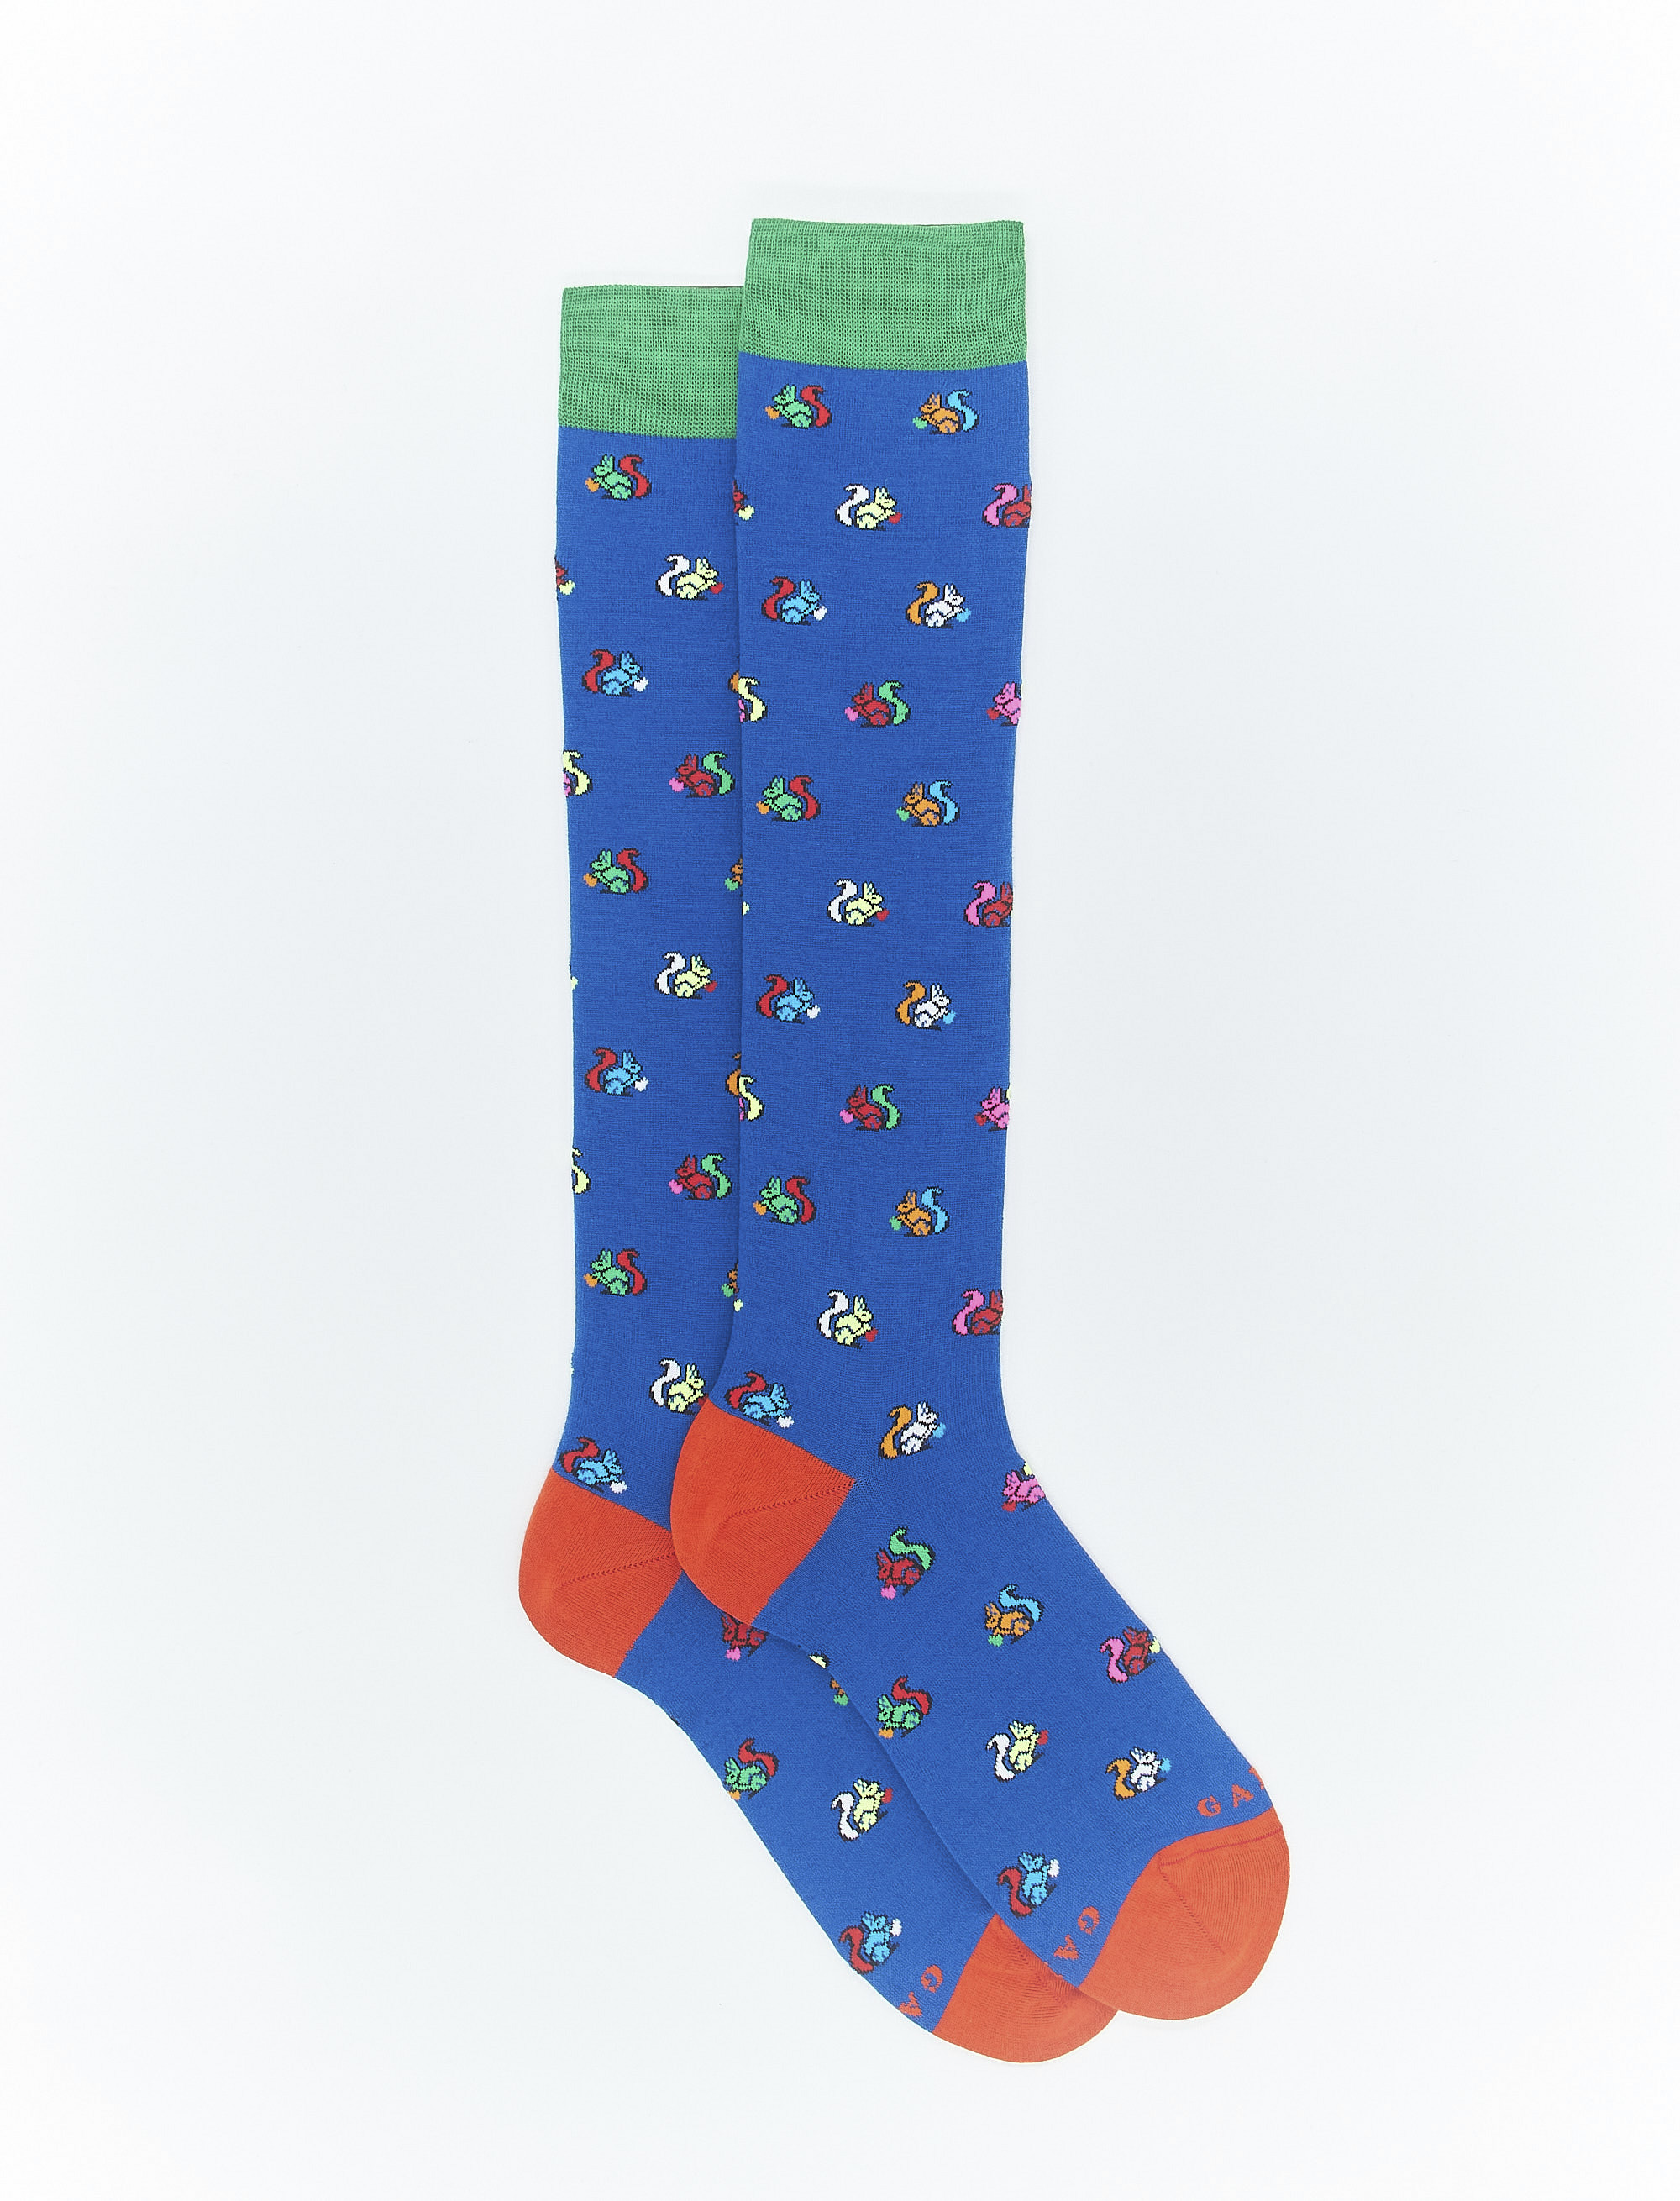 Women's long cosmos blue light cotton socks with squirrel motif - Gallo 1927 - Official Online Shop